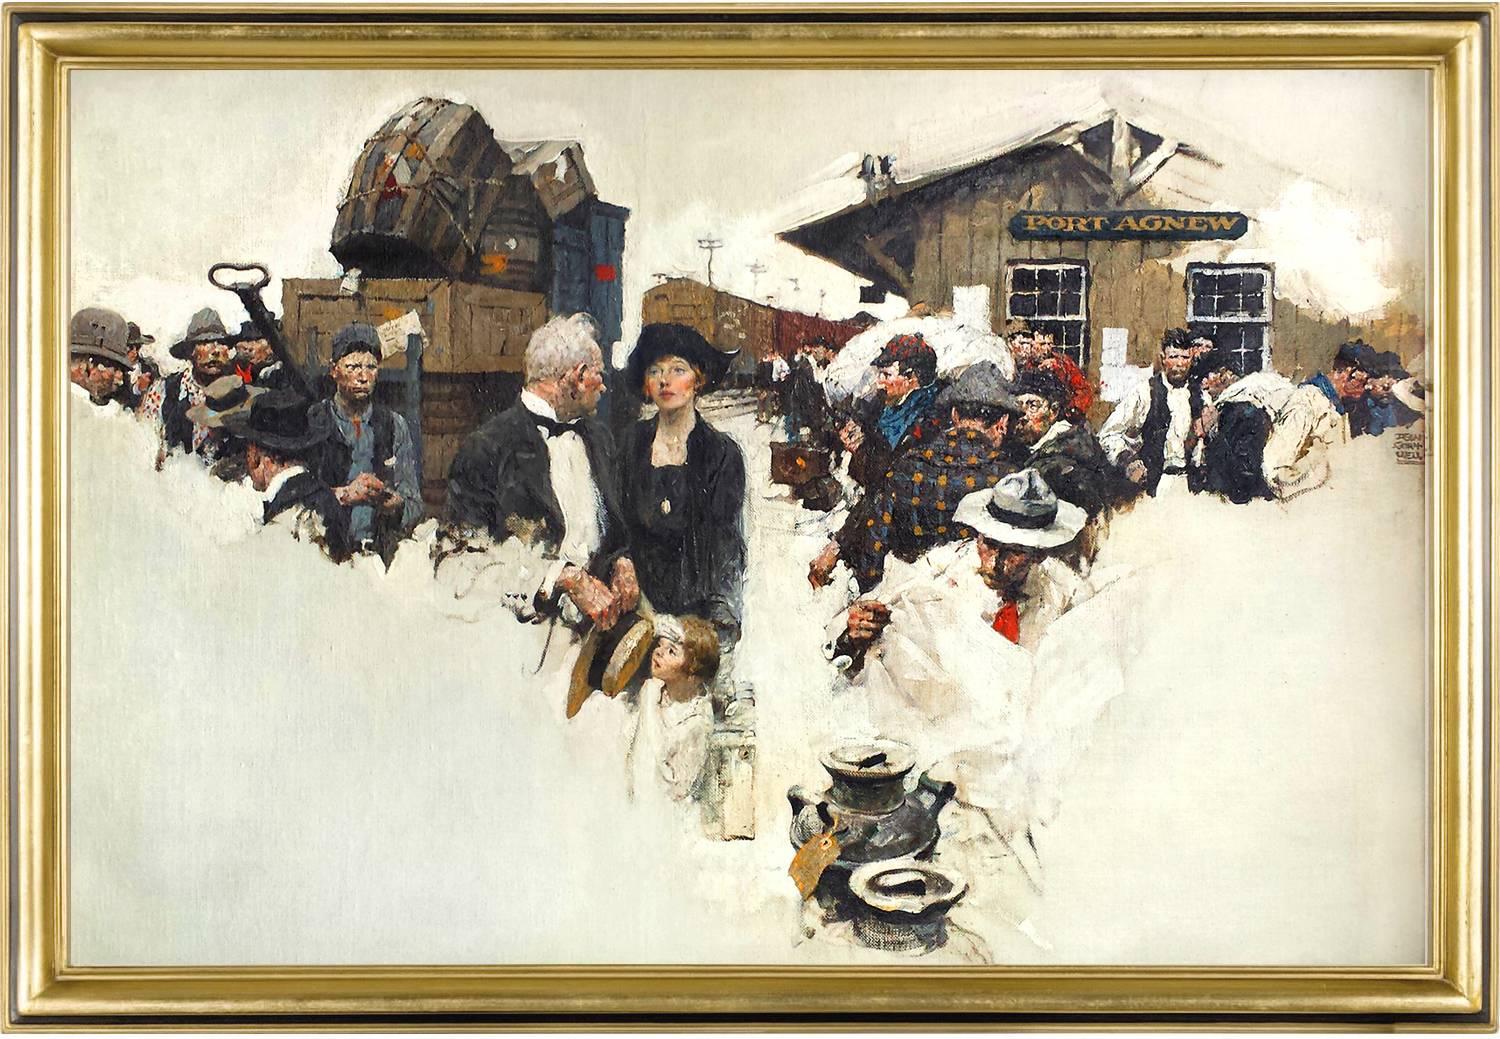 Dean Cornwell Portrait Painting - Kindred of the Dust, Frontier Town Cosmopolitan Magazine